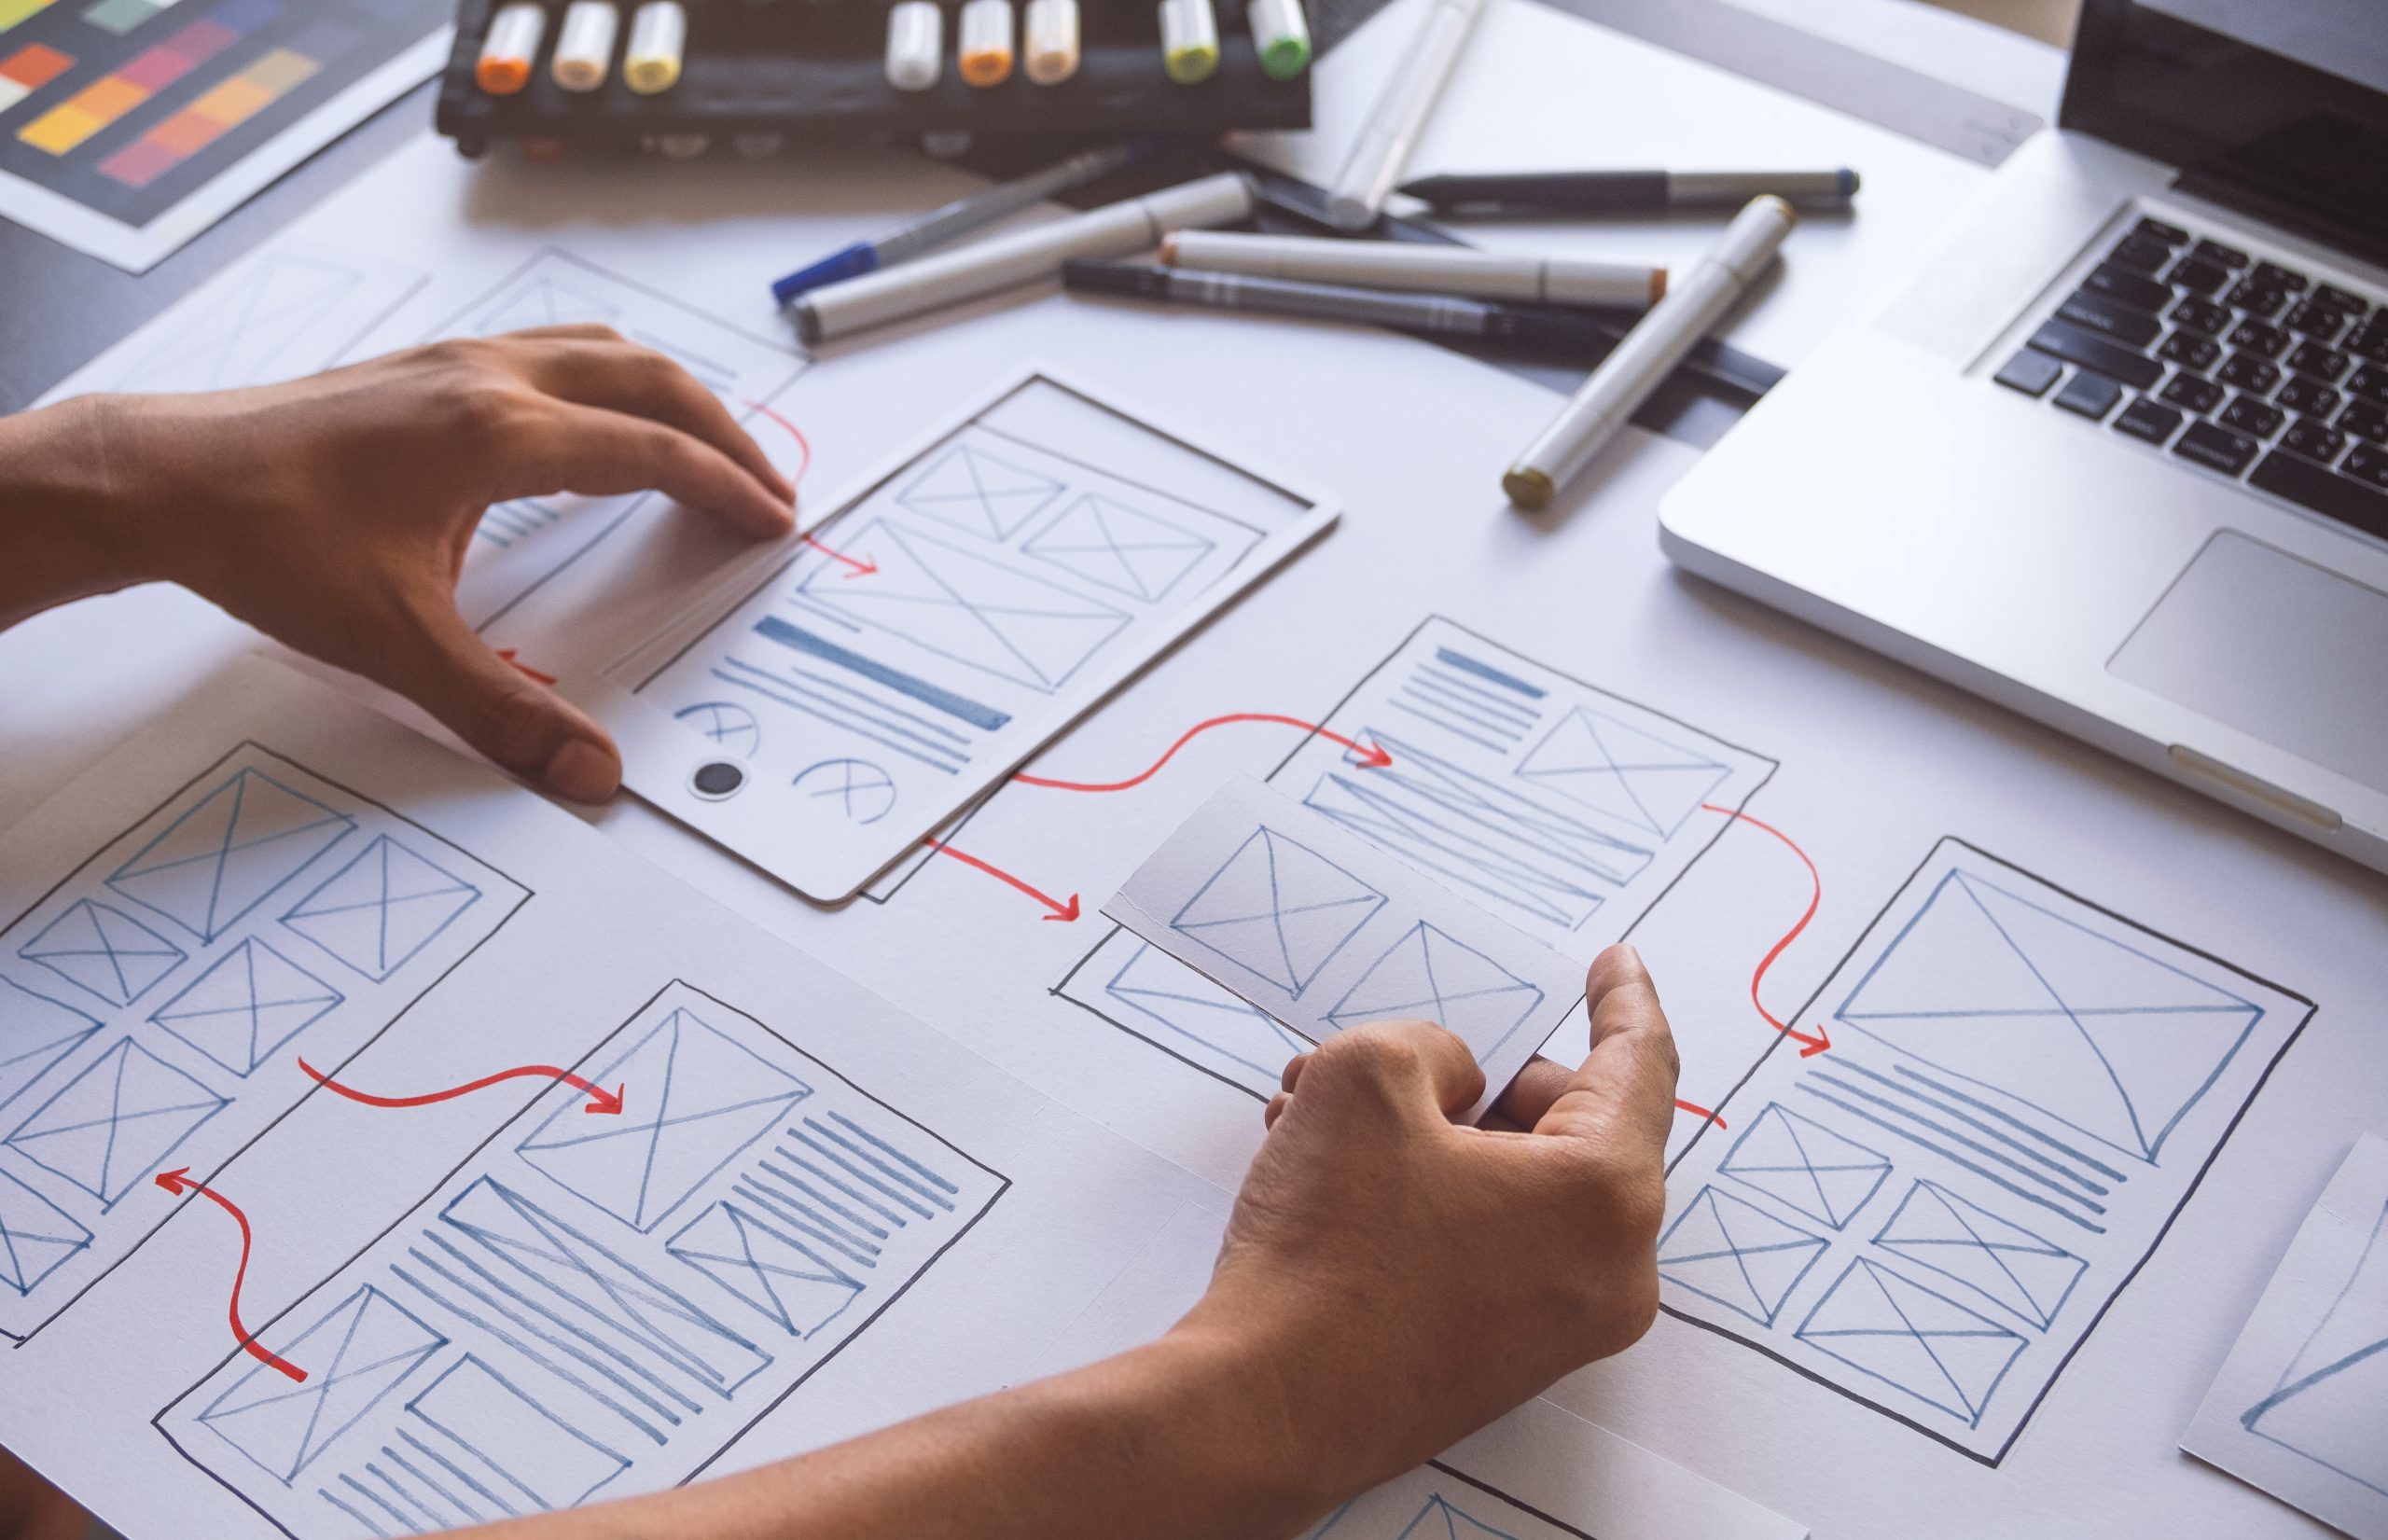 How to Use Design Principles to Streamline Your Business